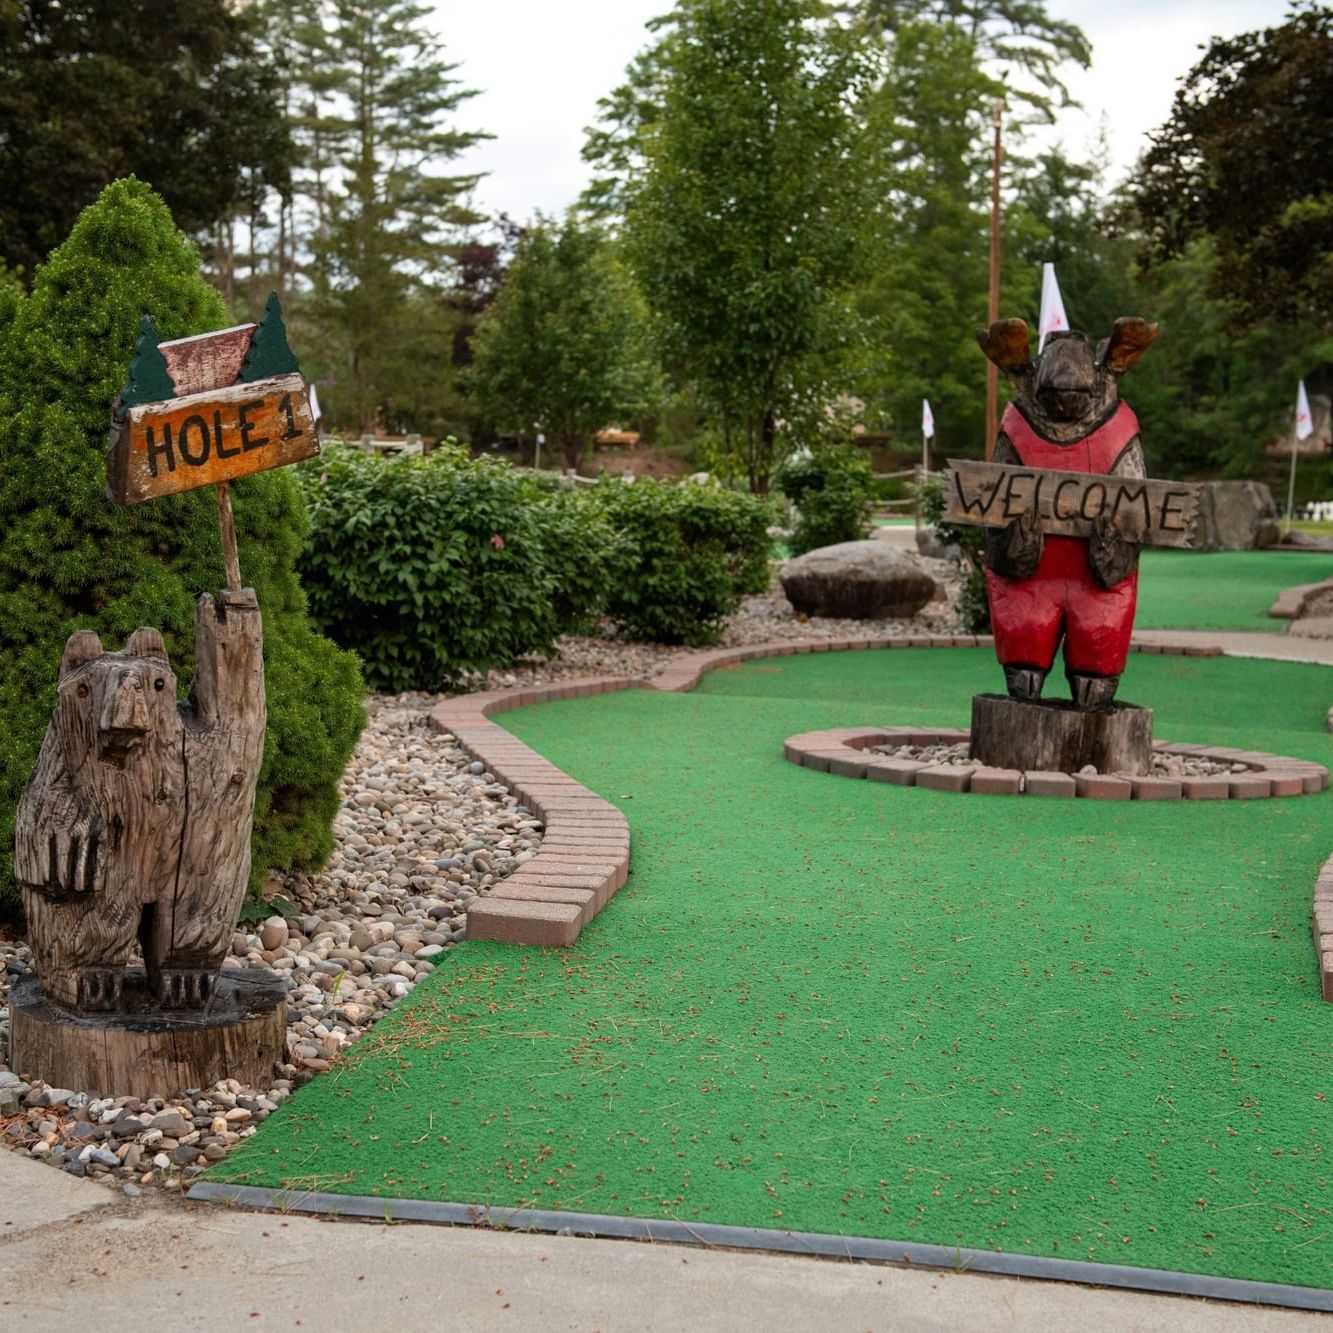 Mini Golf Schroon Lake Family Activities Adirondack Resort Hotel The Lodge Beer and Golf